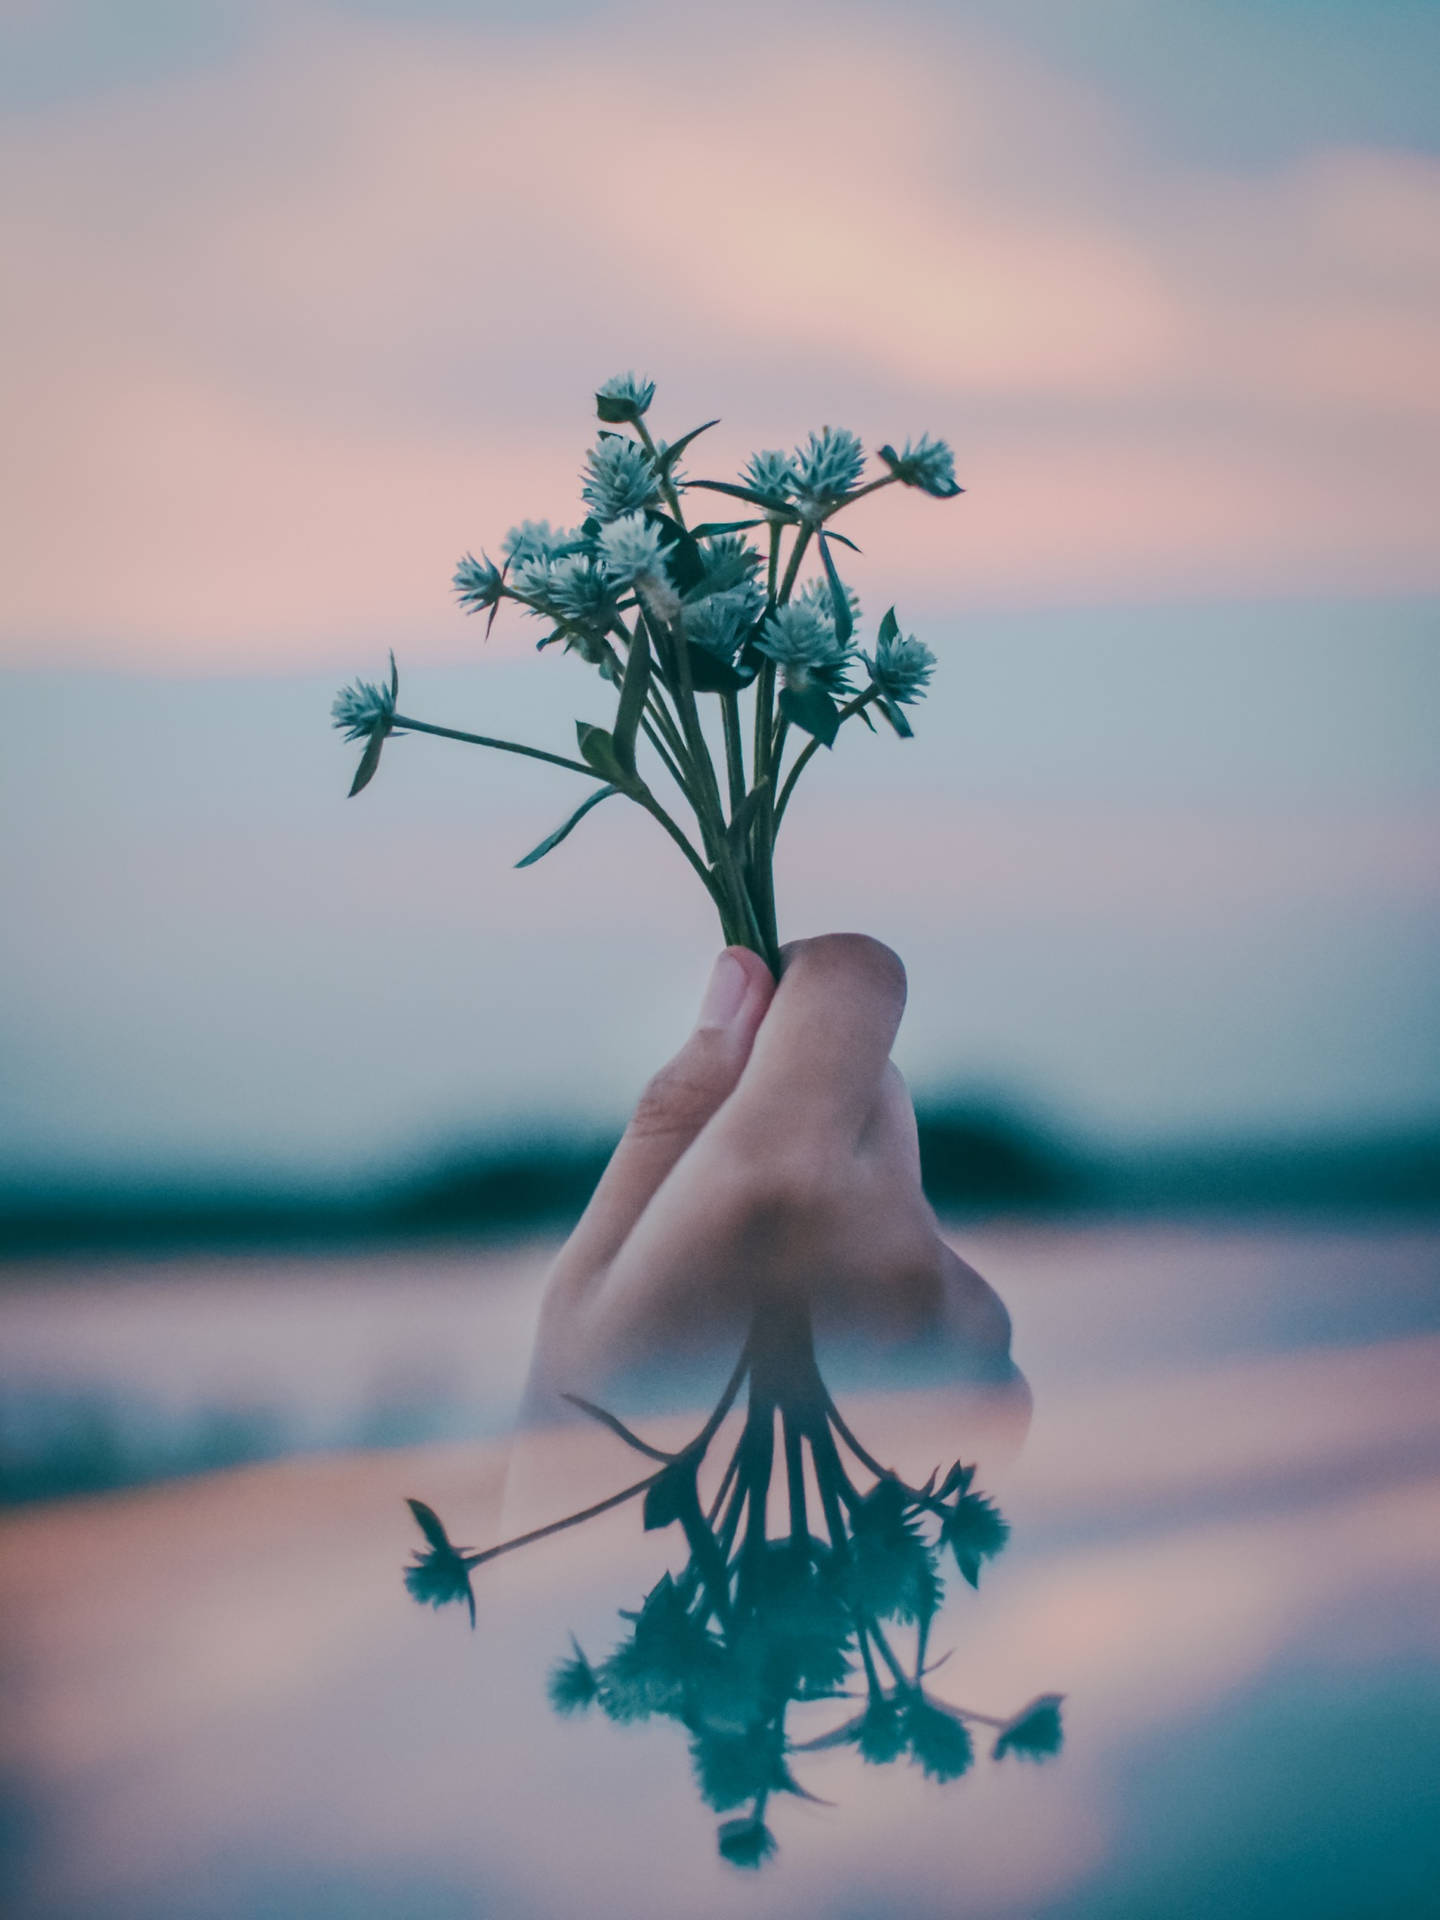 Aesthetic wallpaper of blue tiny flowers in hands in pastel sky. 